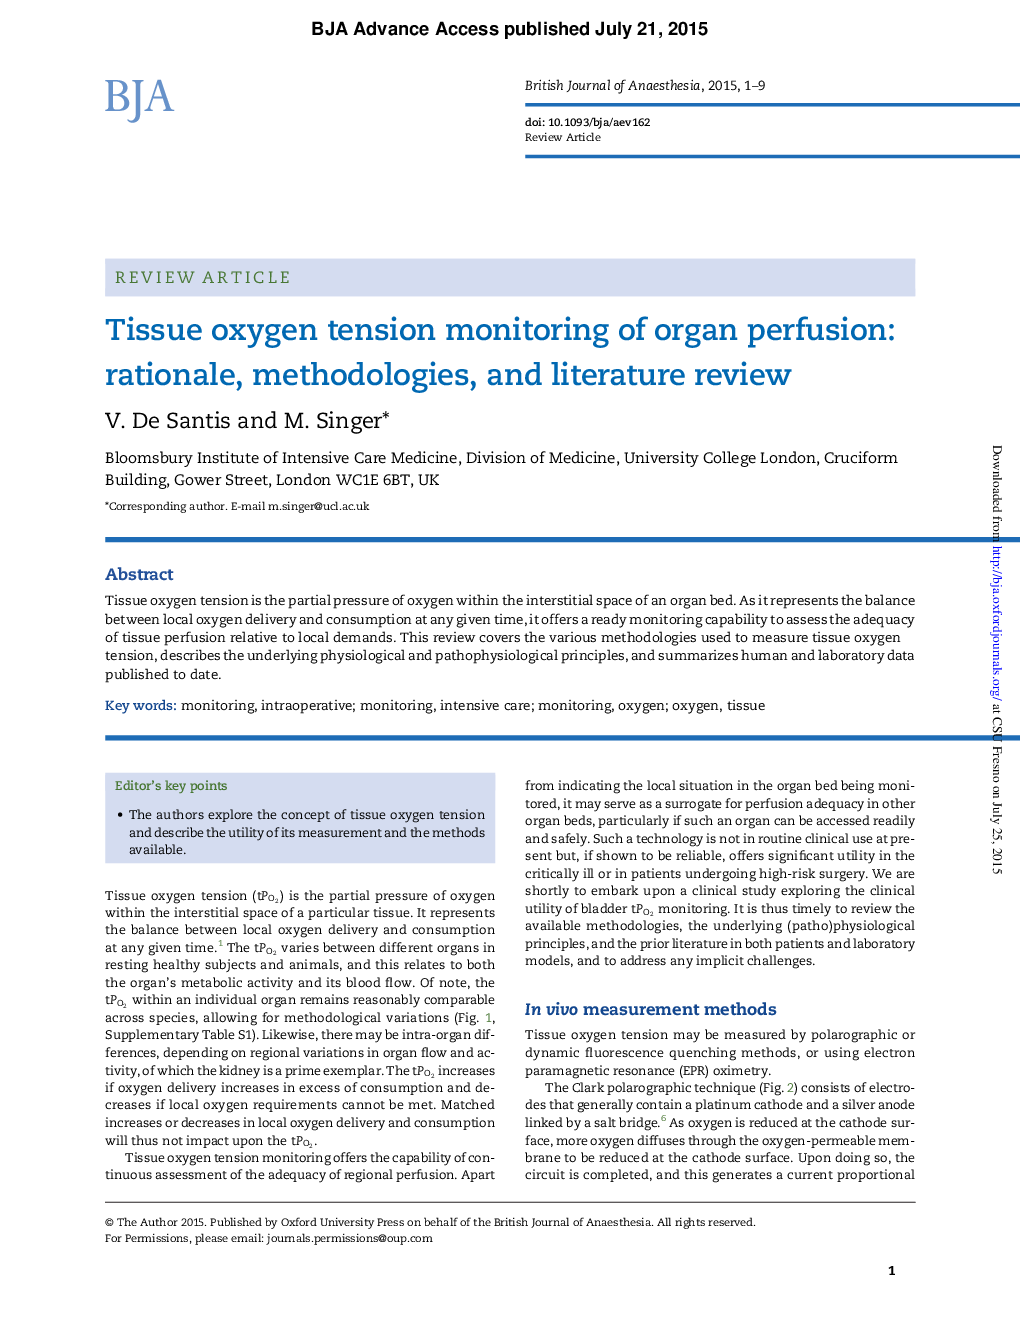 Tissue oxygen tension monitoring of organ perfusion: rationale, methodologies, and literature review